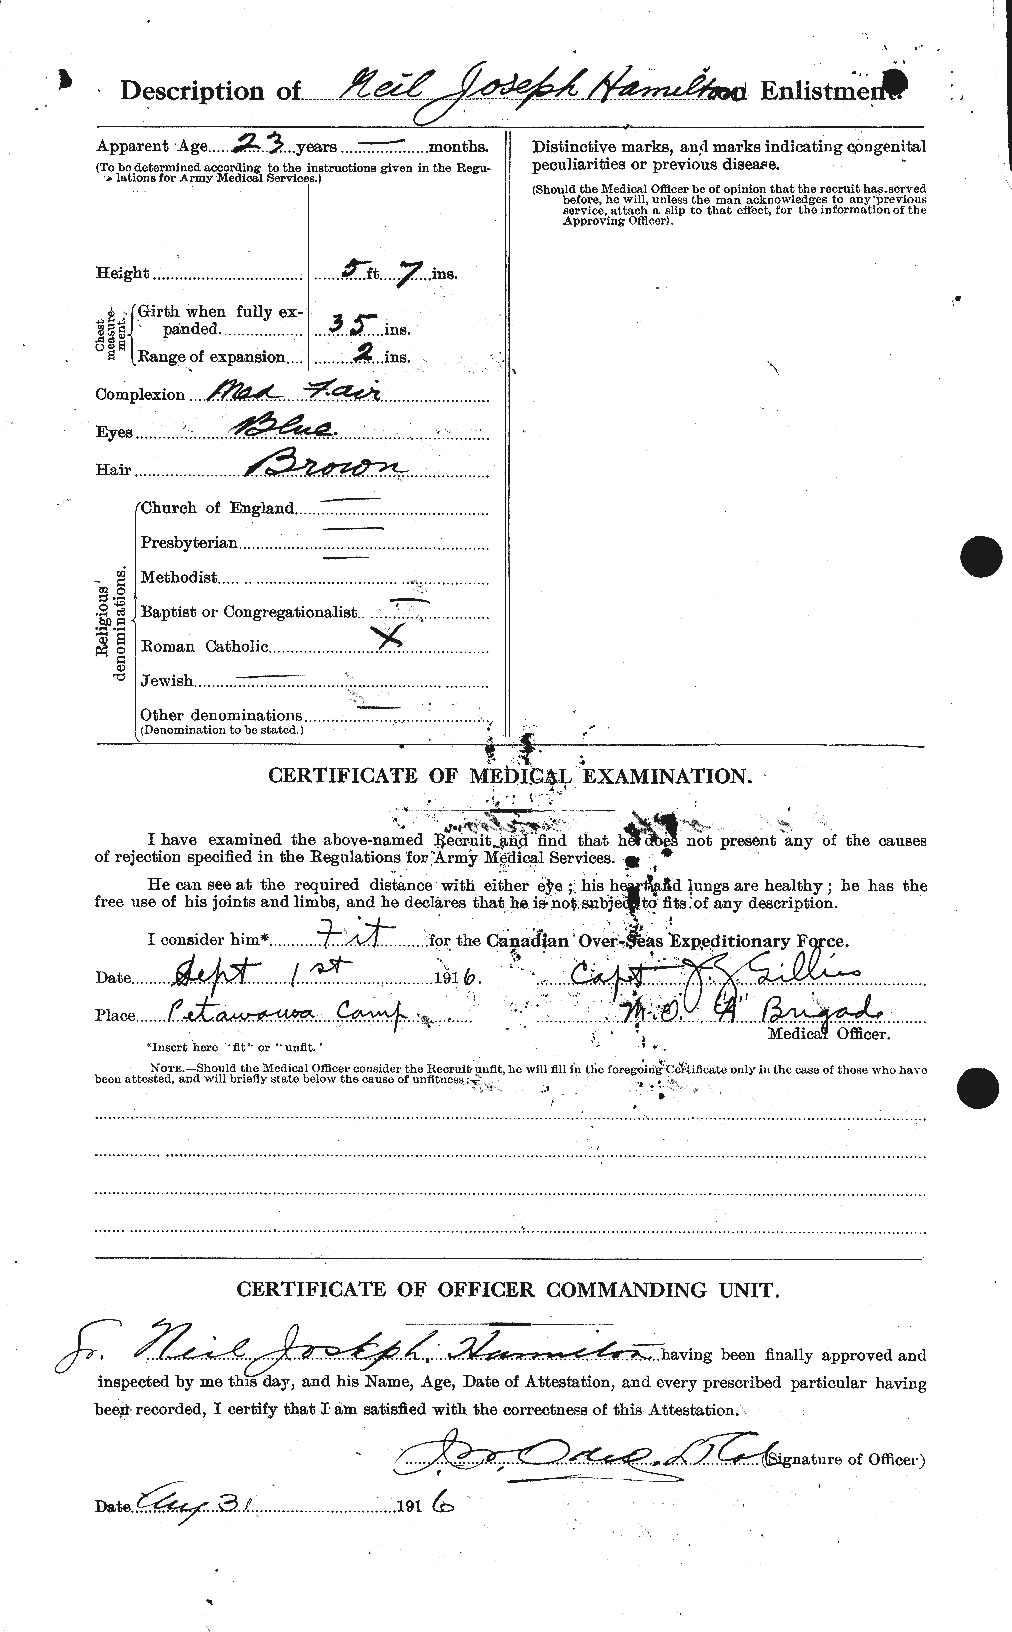 Personnel Records of the First World War - CEF 373192b